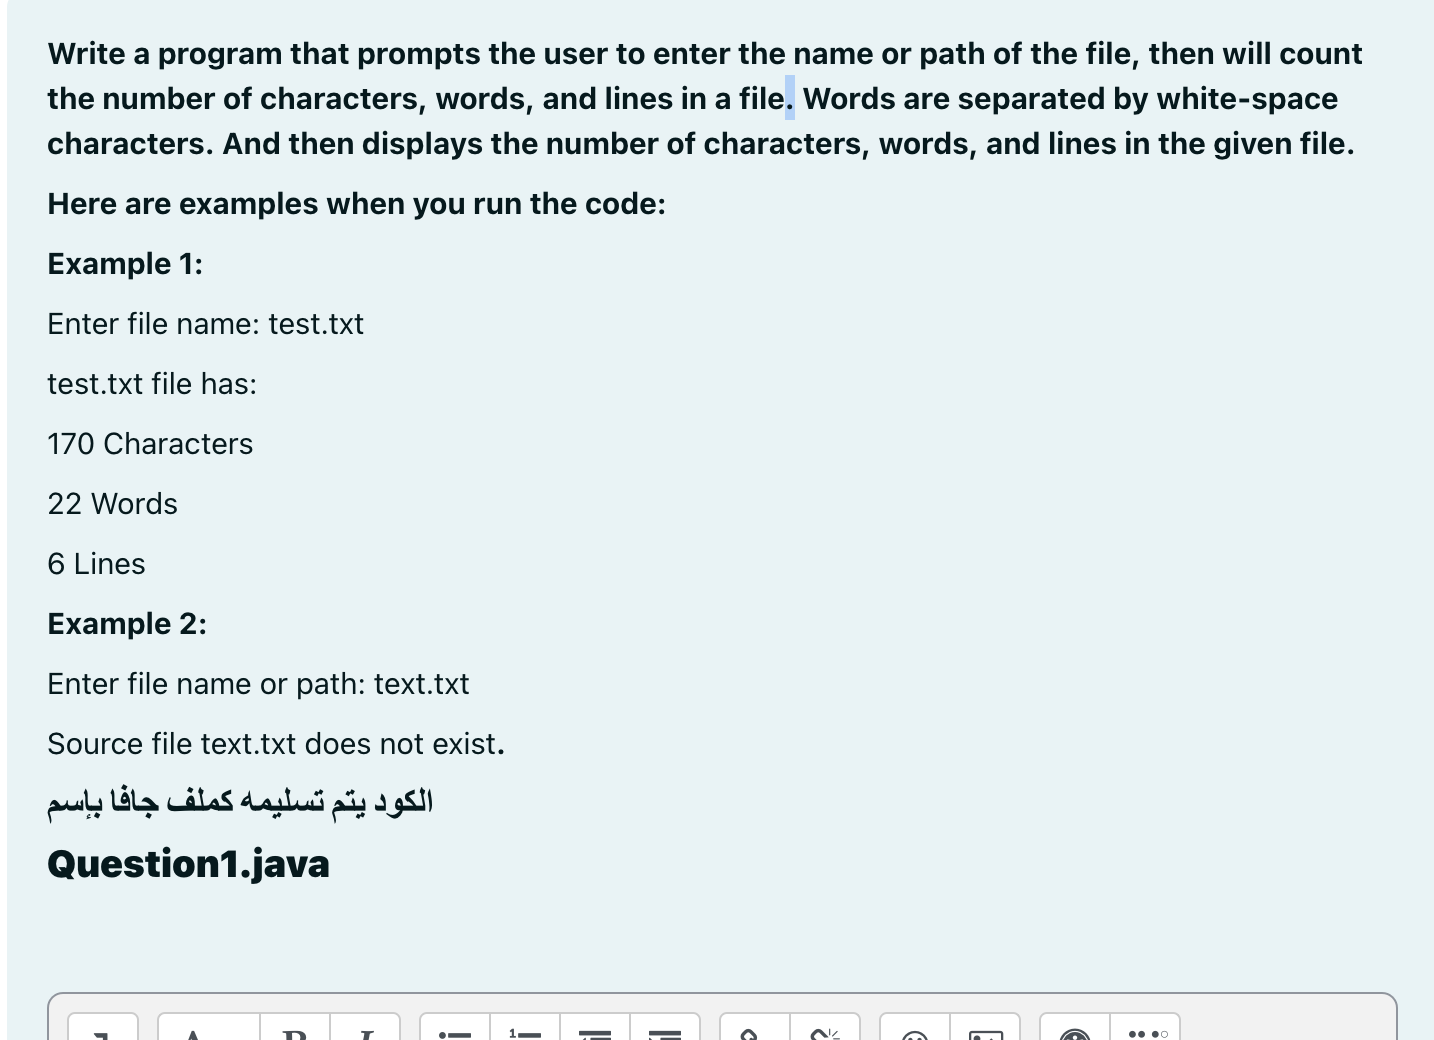 Write a program that prompts the user to enter the name or path of the file, then will count the number of